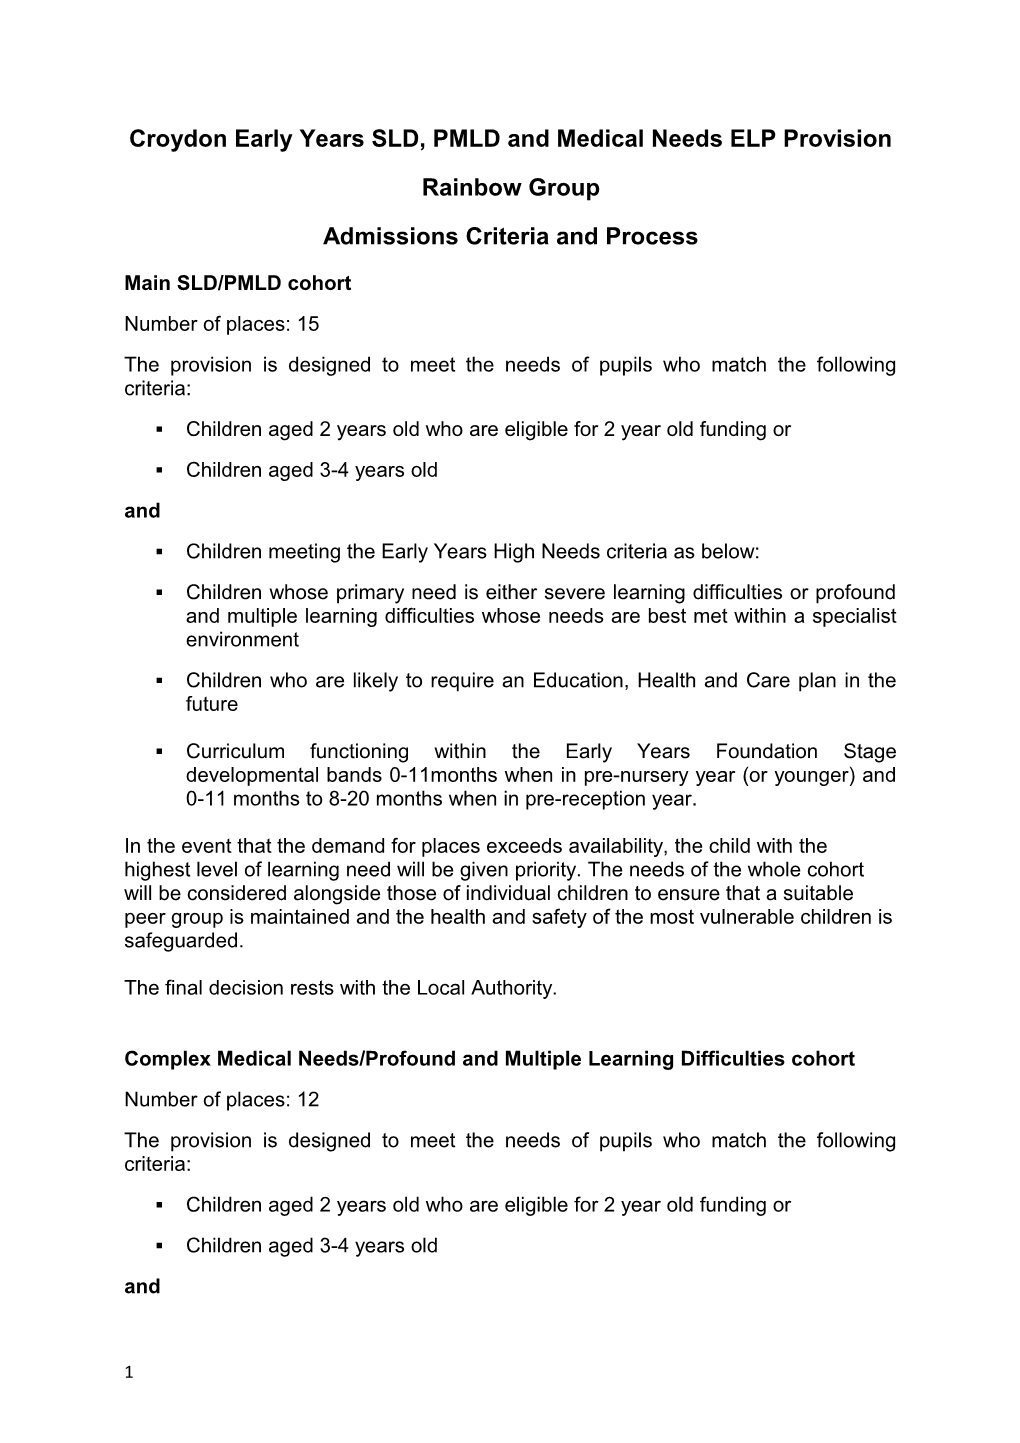 EY ELP Admissions Criteria and Process September 2015